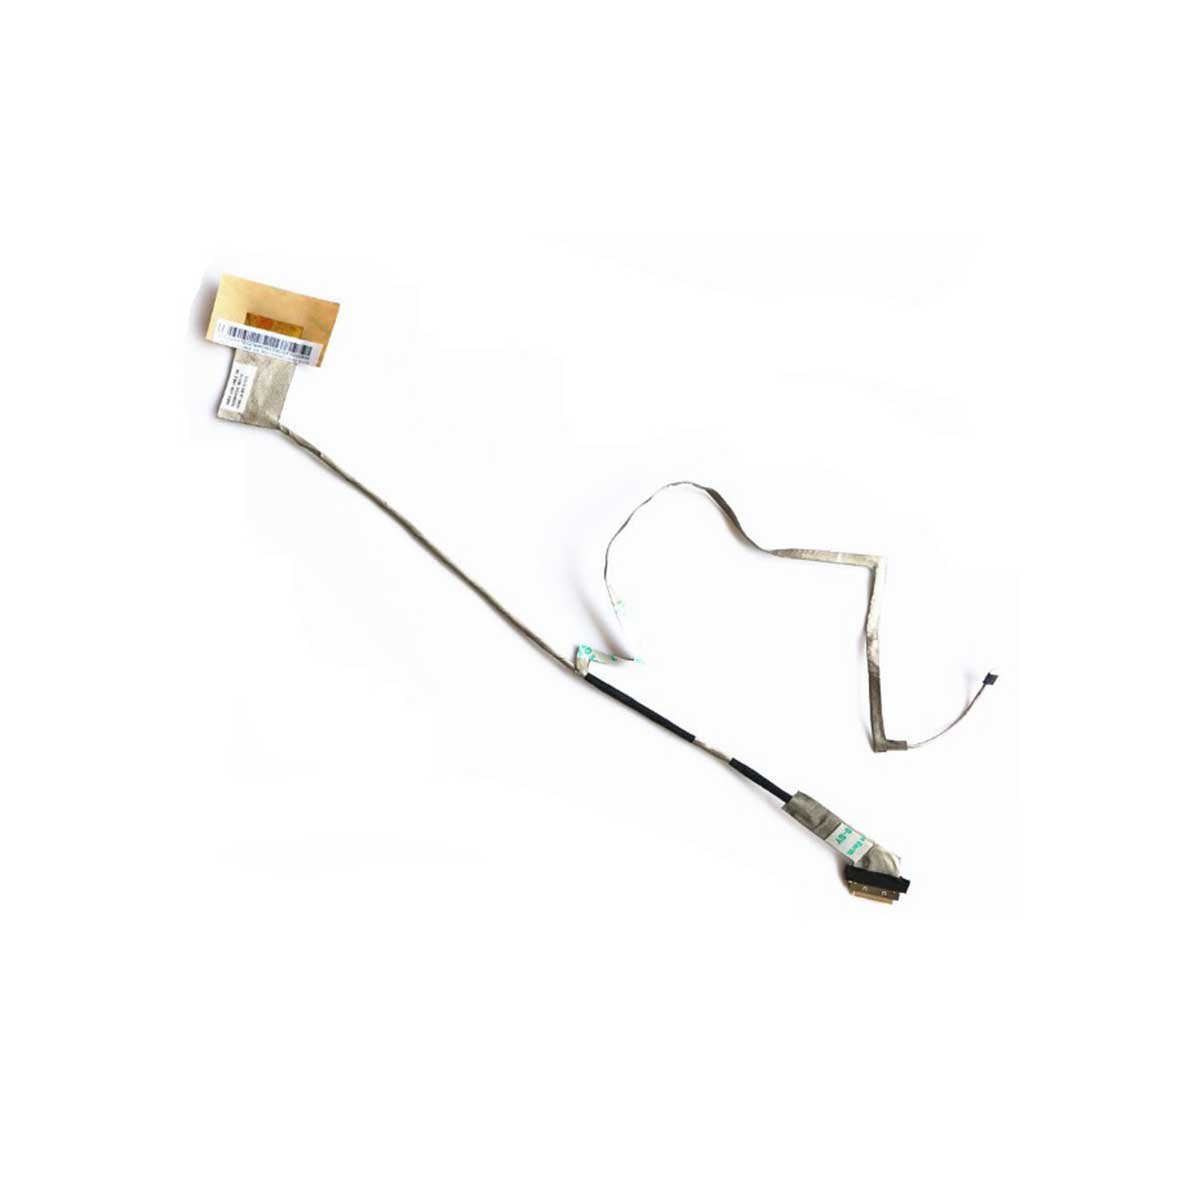 Lenovo Ideapad G480 G480a G480ah OEM LCD LED LVDS Screen Display Video Camera Cable P/N DC02001EQ10